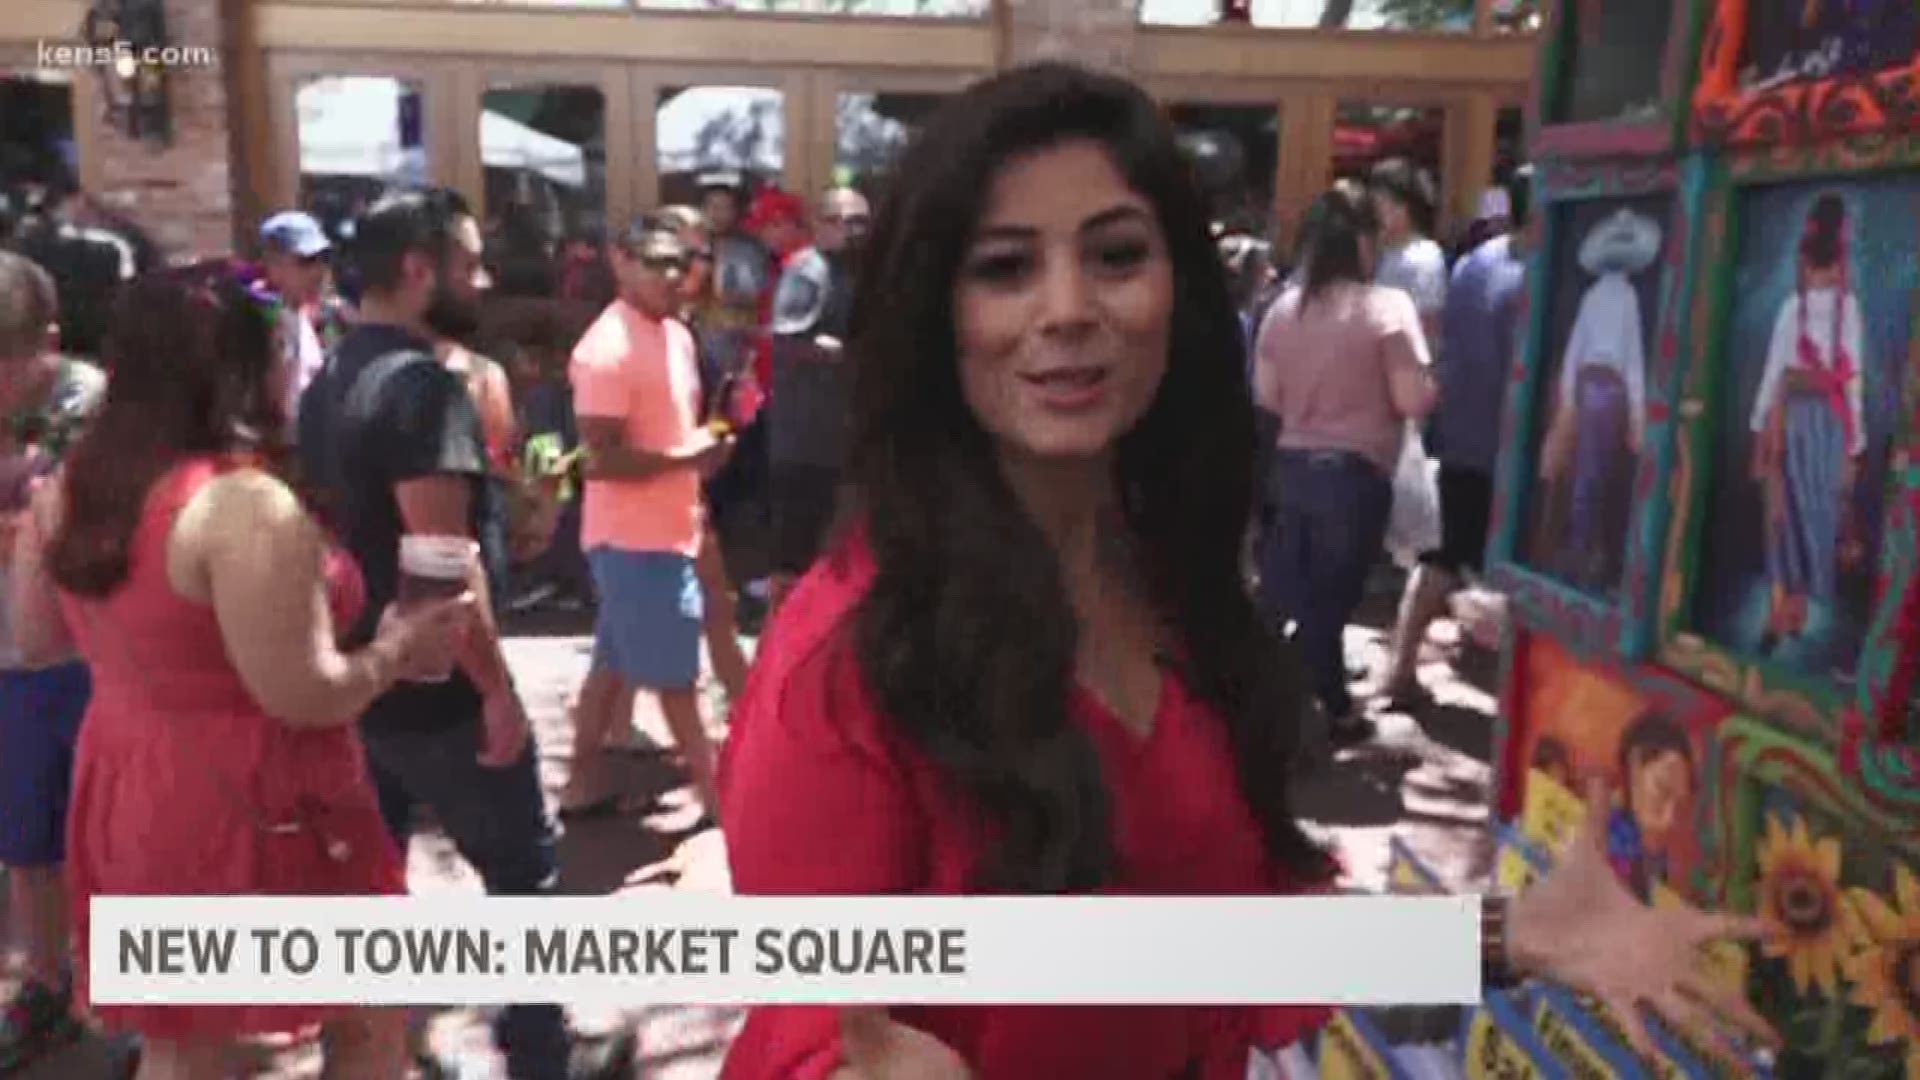 KENS 5's Niku Kazori is new to town and exploring Market Square during Fiesta.